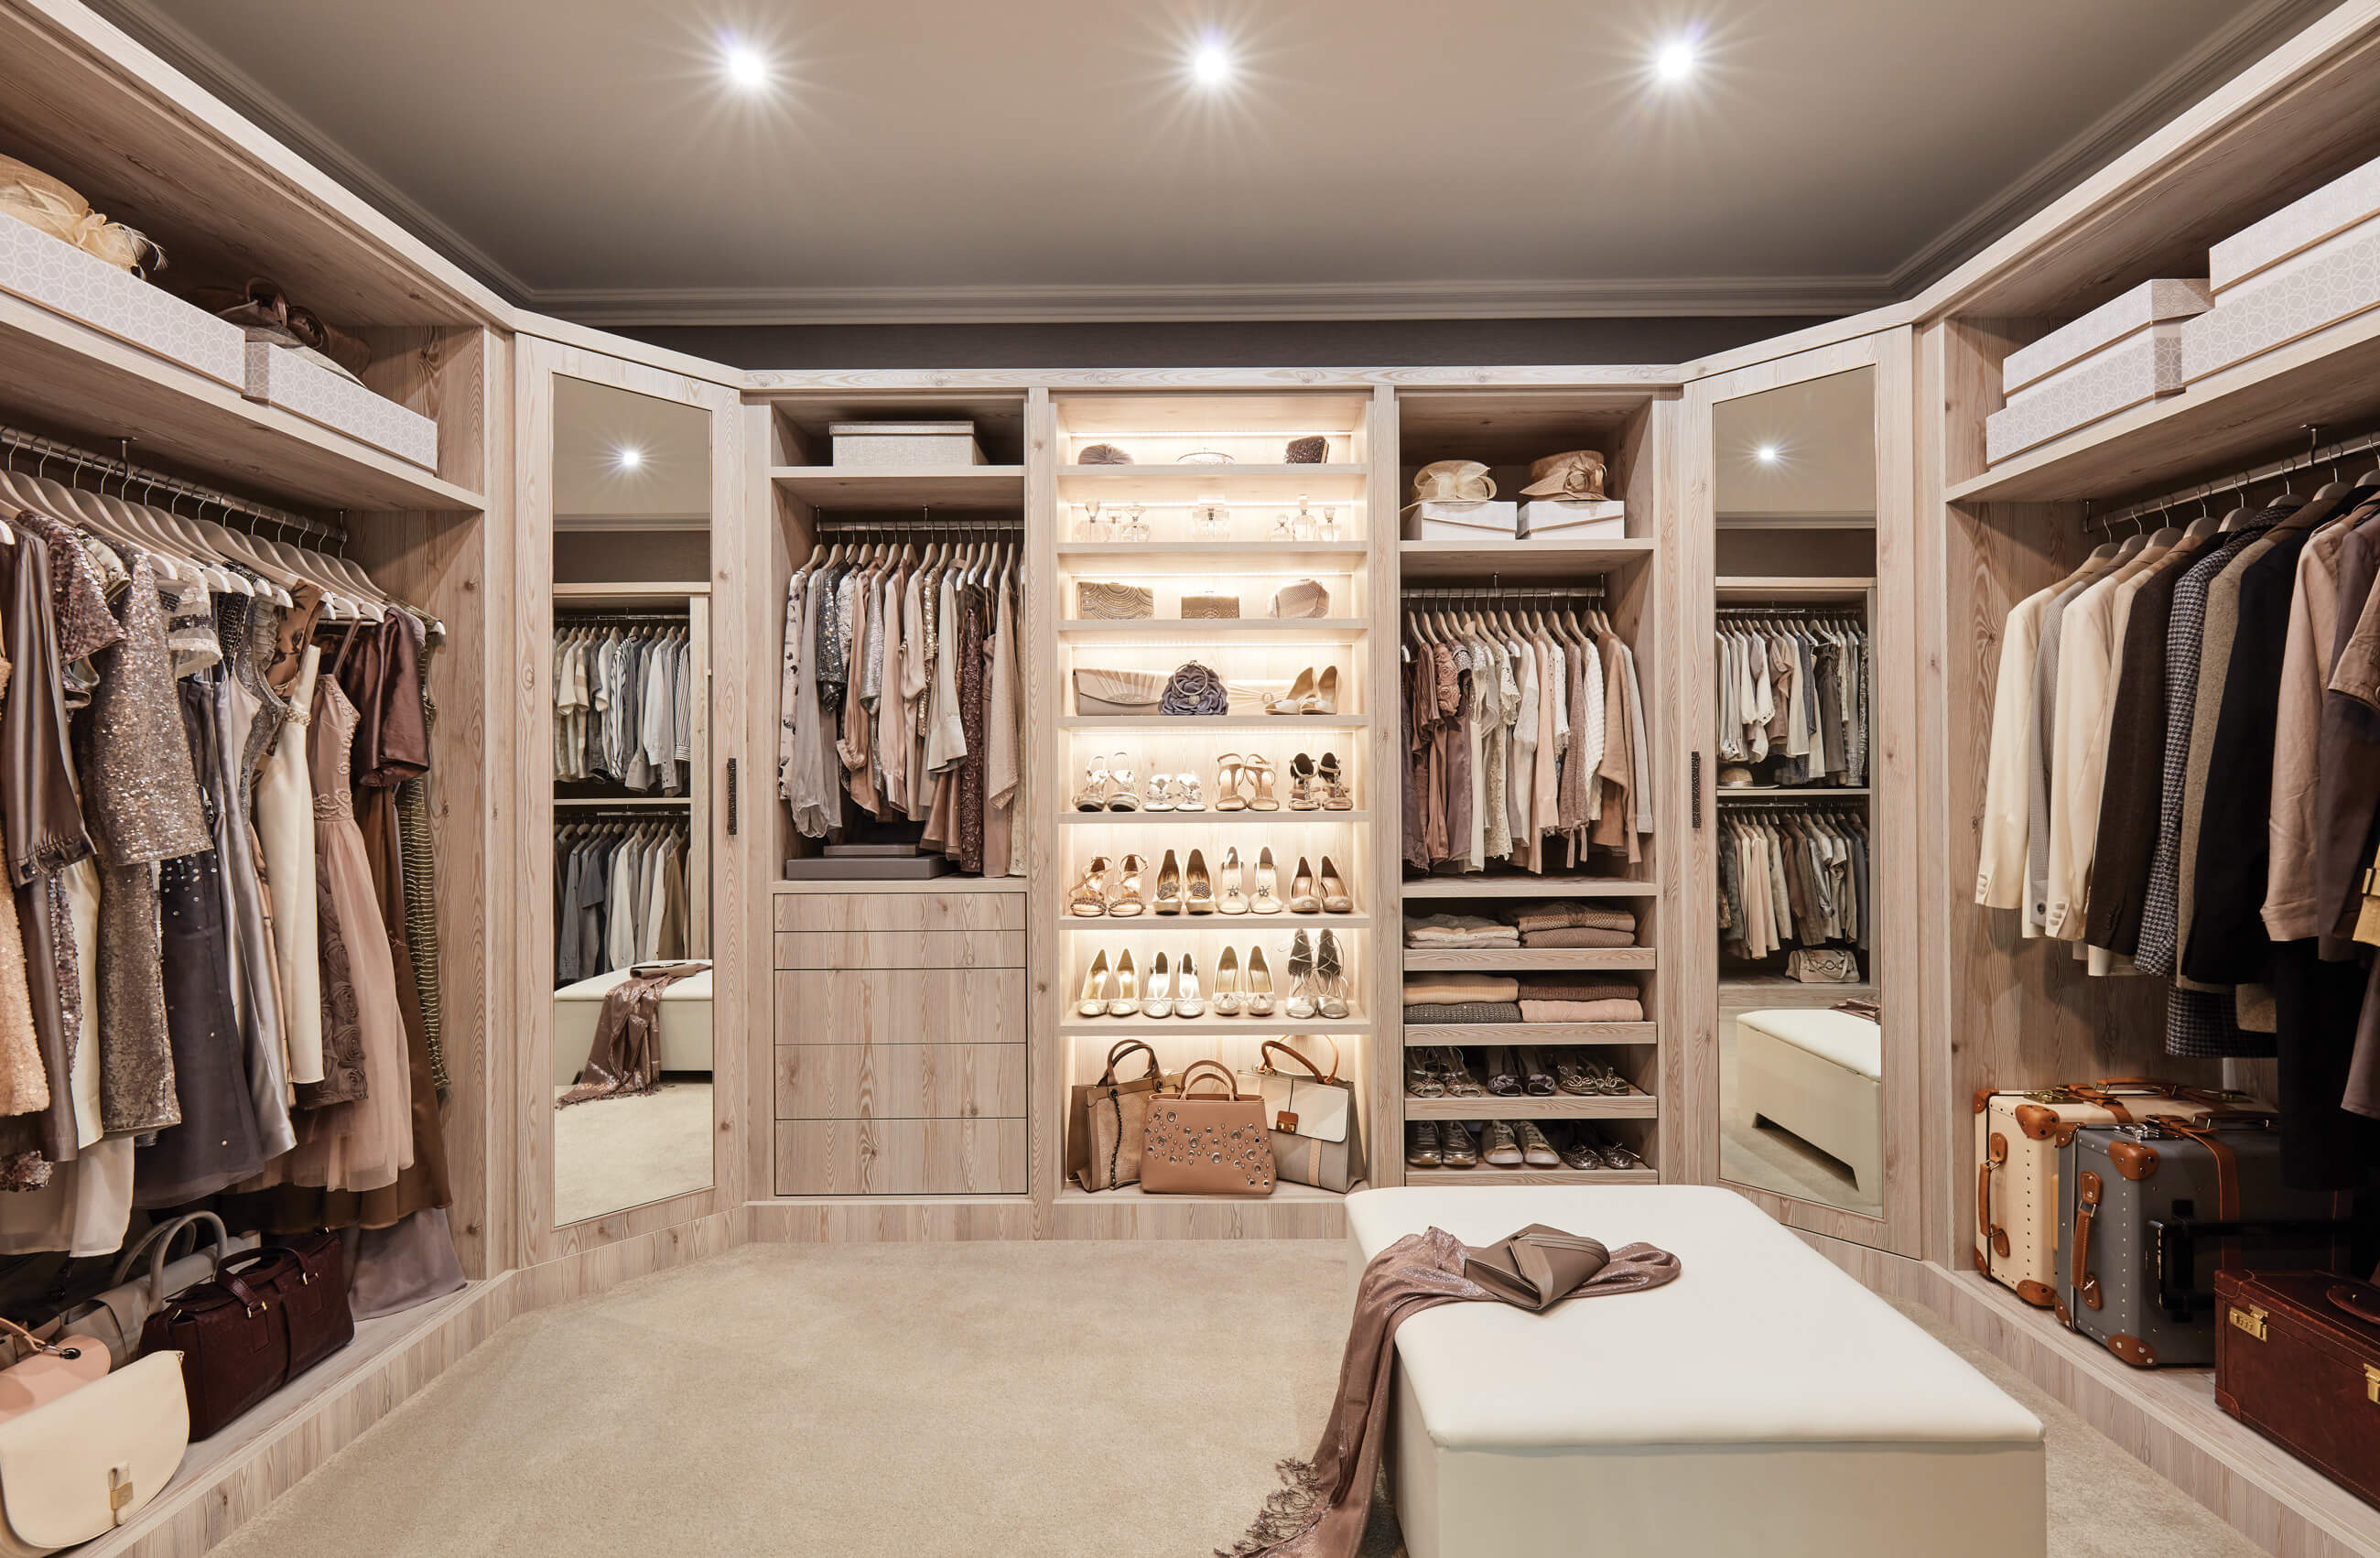 Take closet inspiration from these 6 luxurious walk-in wardrobes |  Architectural Digest India